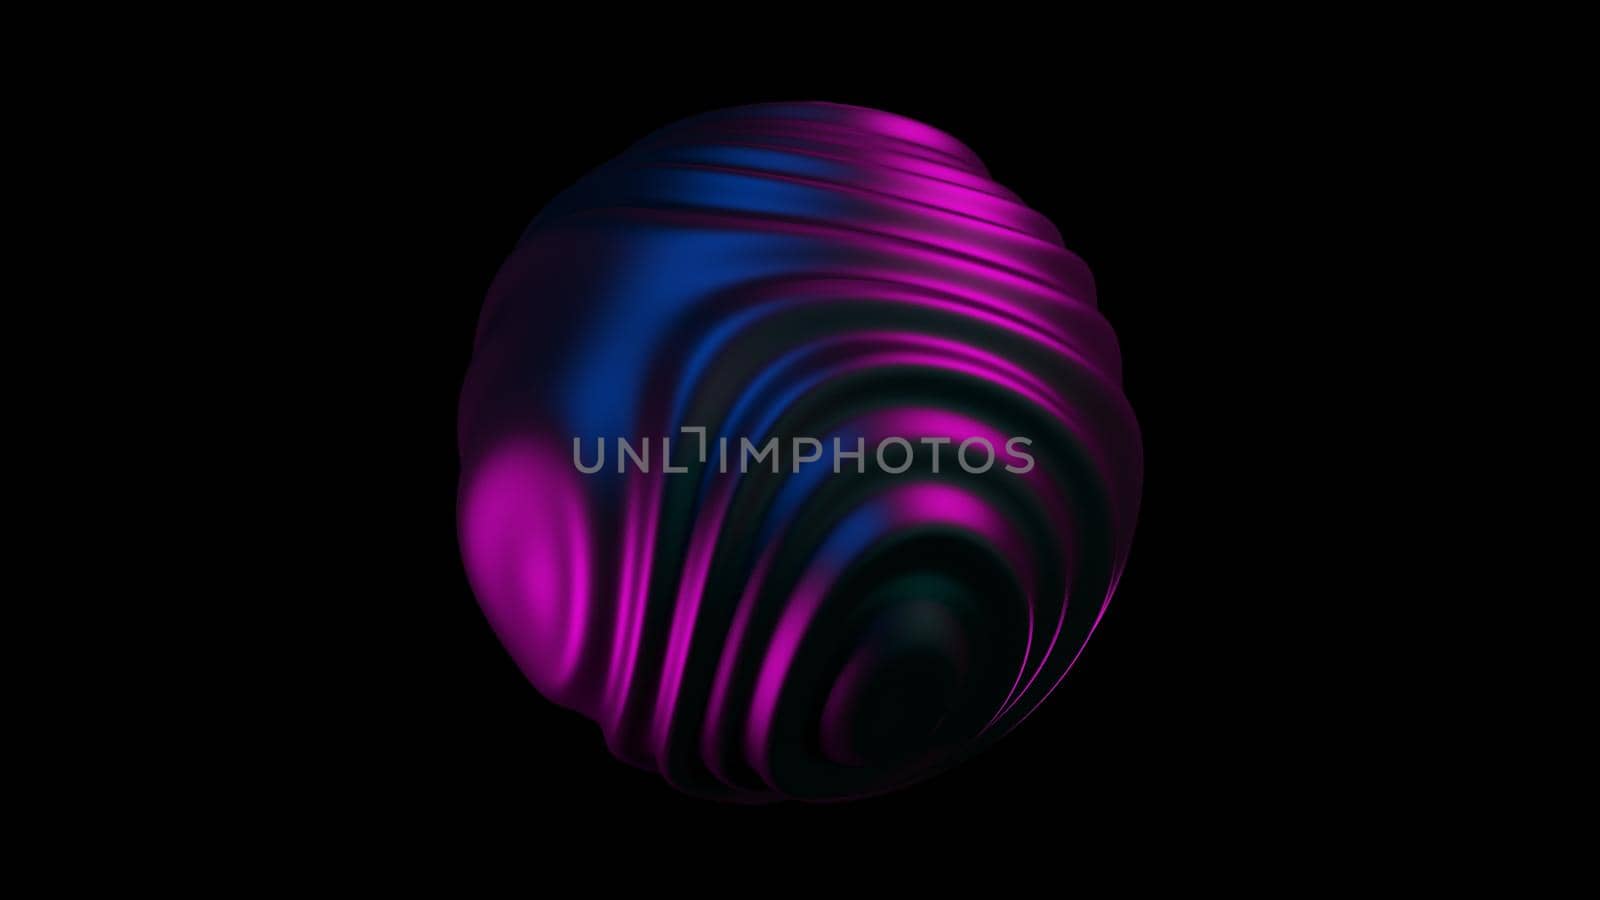 Liquid Sphere 3d blue purple light illustration. Abstract morphing sphere. Liquid holographic background. by DmytroRazinkov